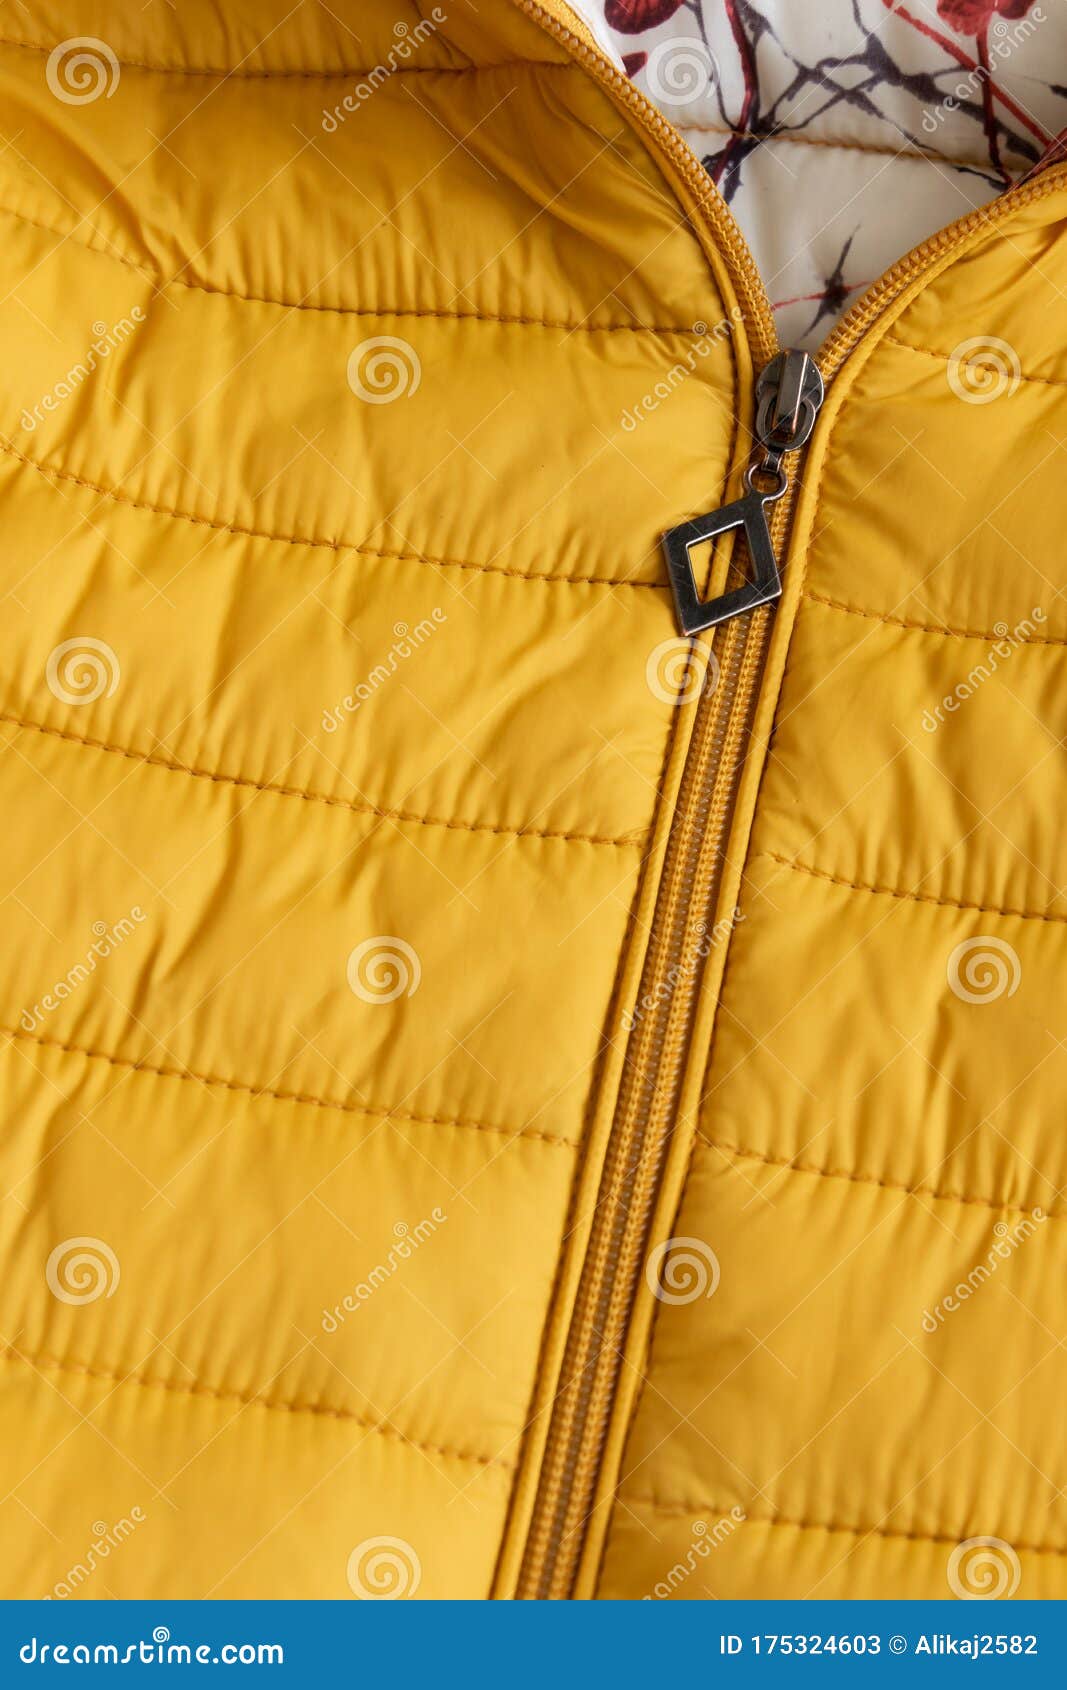 Crop View of Yellow Down Jacket Stock Image - Image of female, sell ...